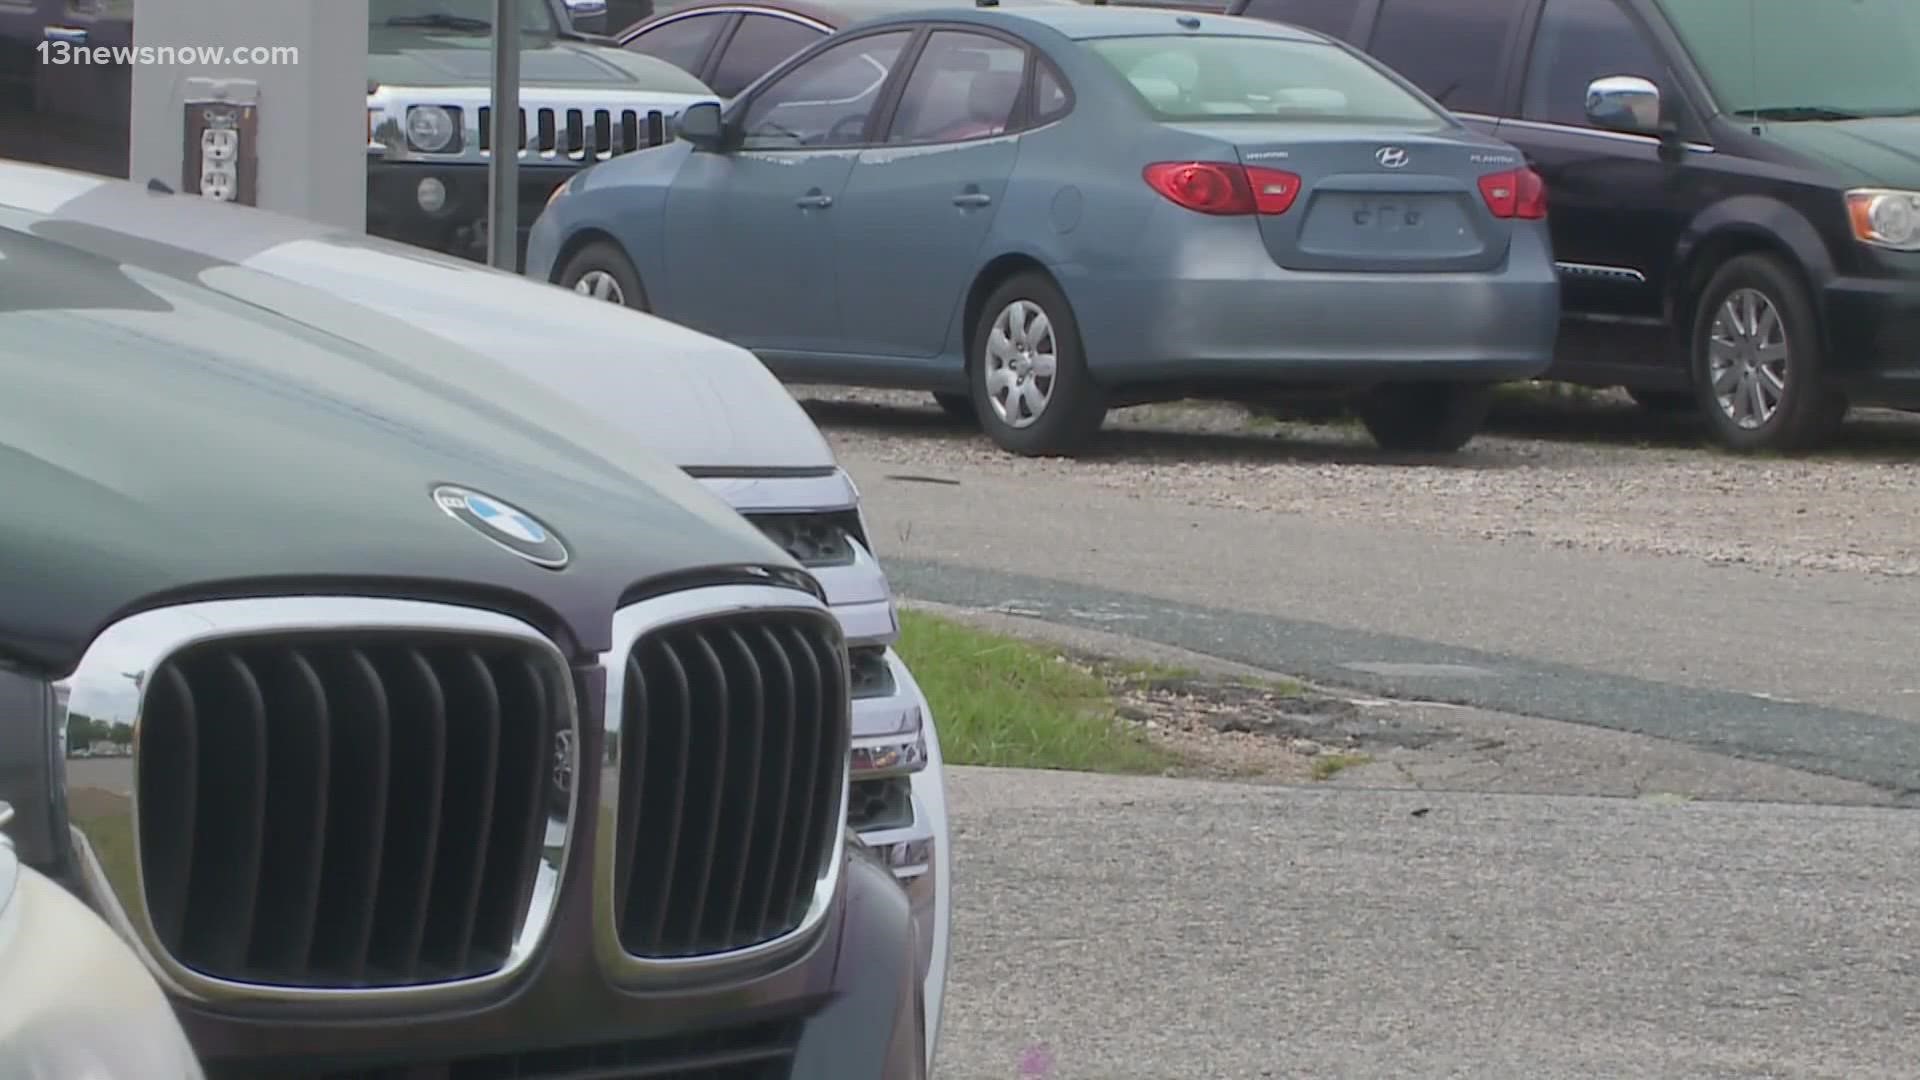 In Virginia Beach, hundreds of people are reporting thieves running off with their vehicles.